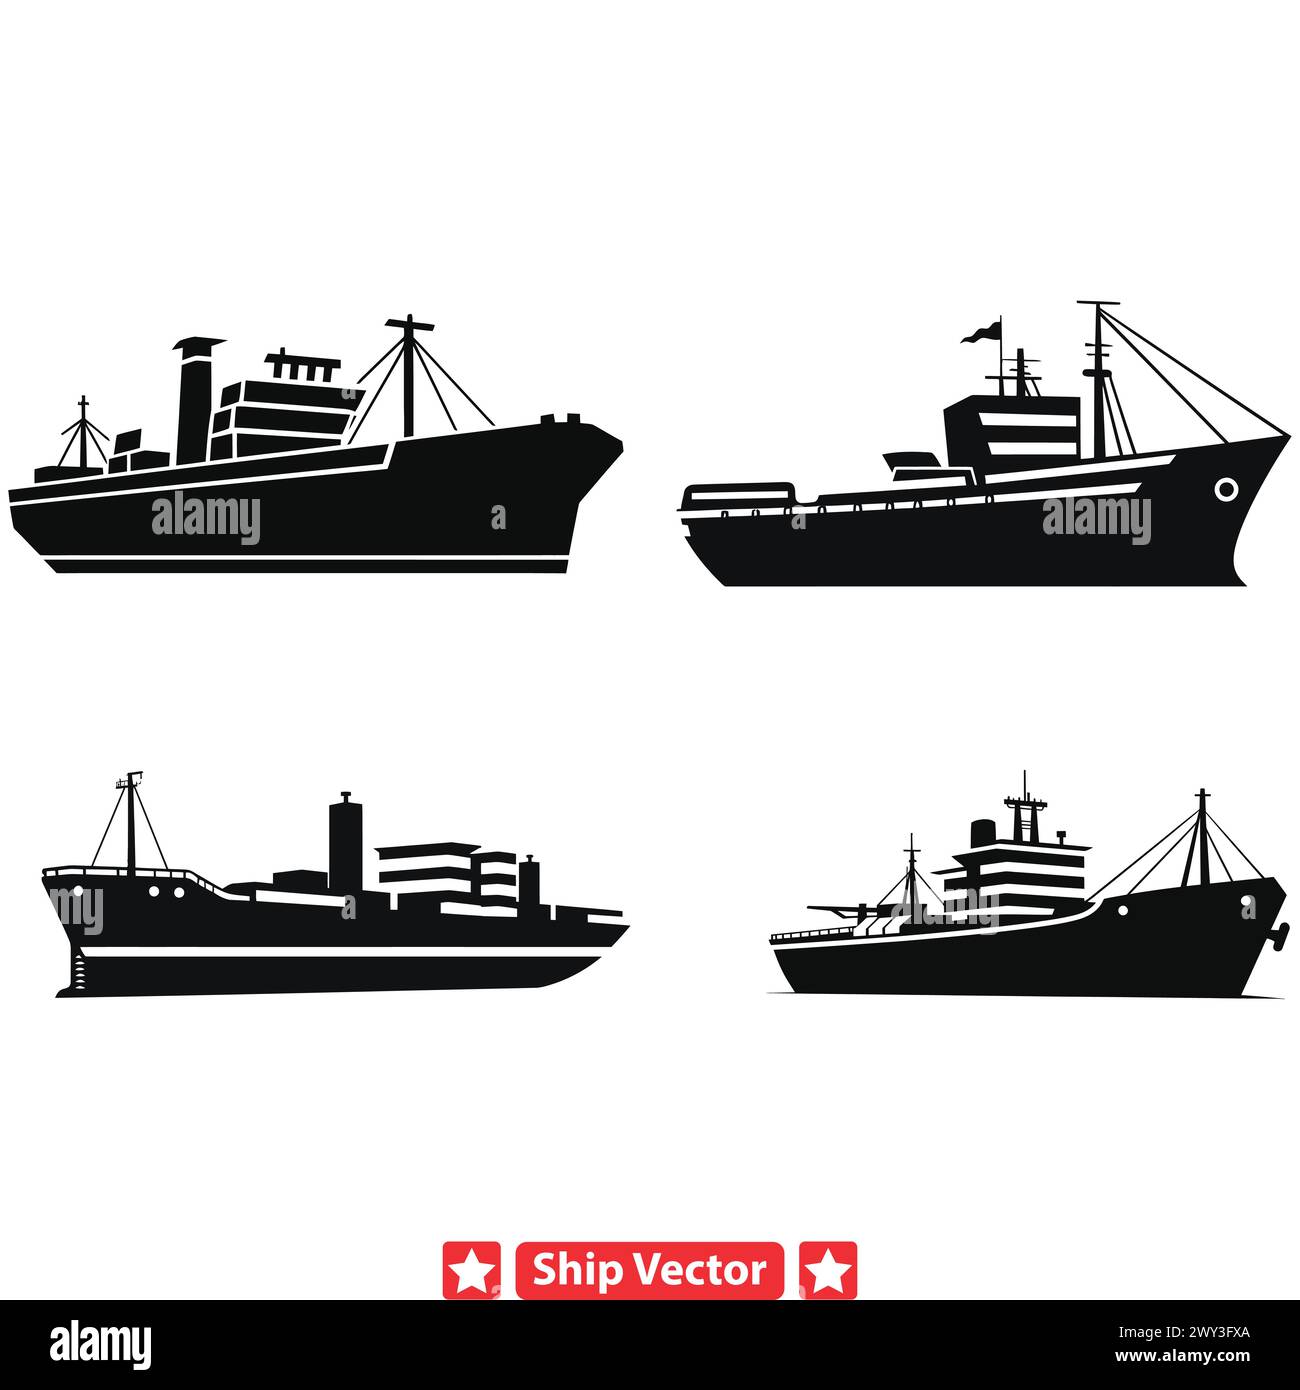 Ancient Mariners  Timeless Ship Silhouettes Echoing the Rich History of Seafaring Traditions Stock Vector